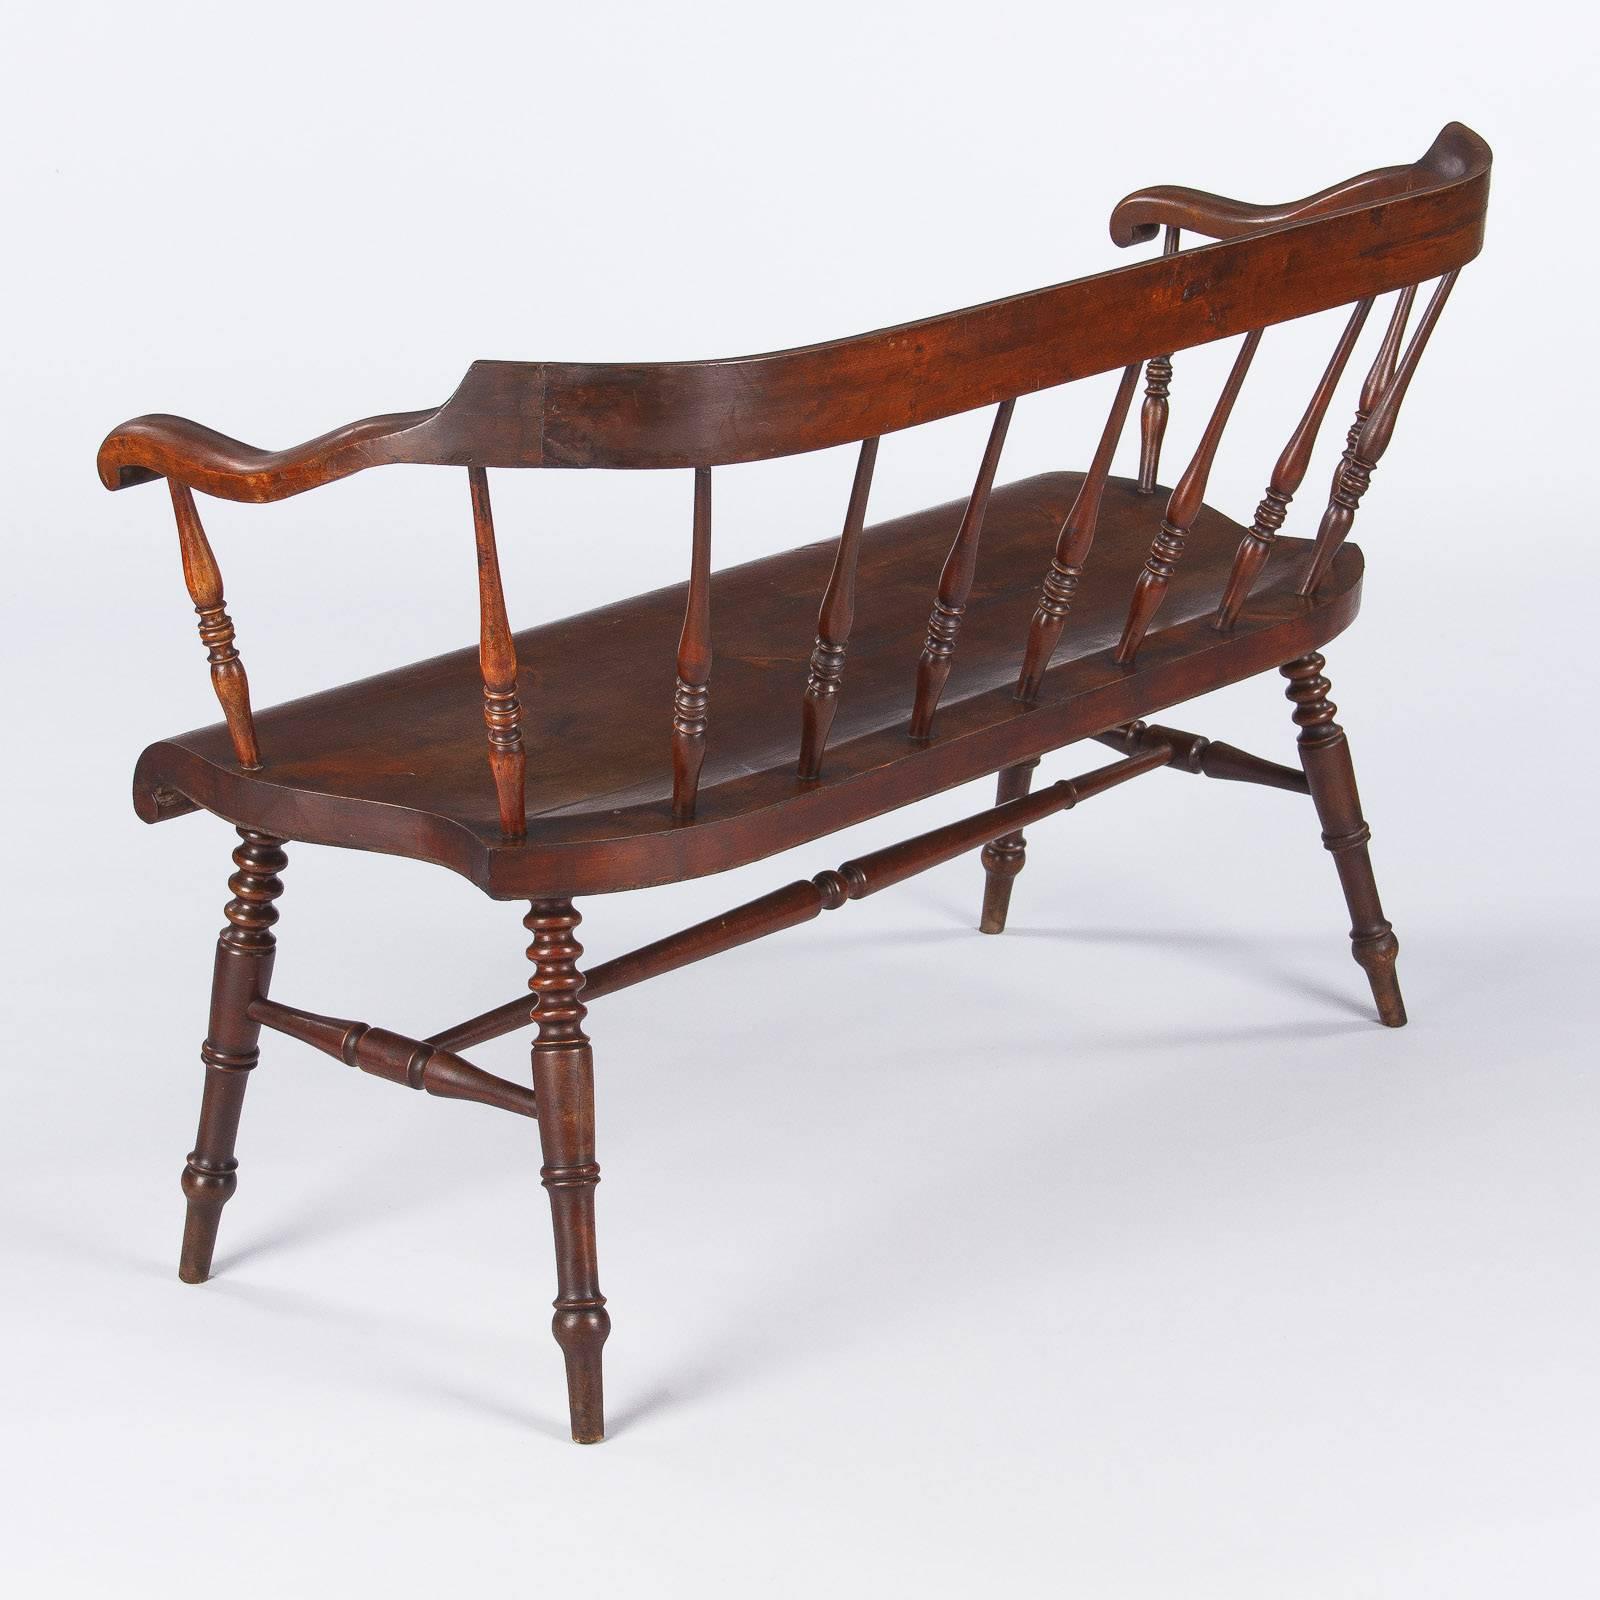 This handsome bentwood bench is attributed to Baumann, a furniture manufacture founded in 1901. Emile Baumann was a disciple of Thonet. This banister back bench is made of beech wood and poplar. The back, armrests and seat are curved. The turned